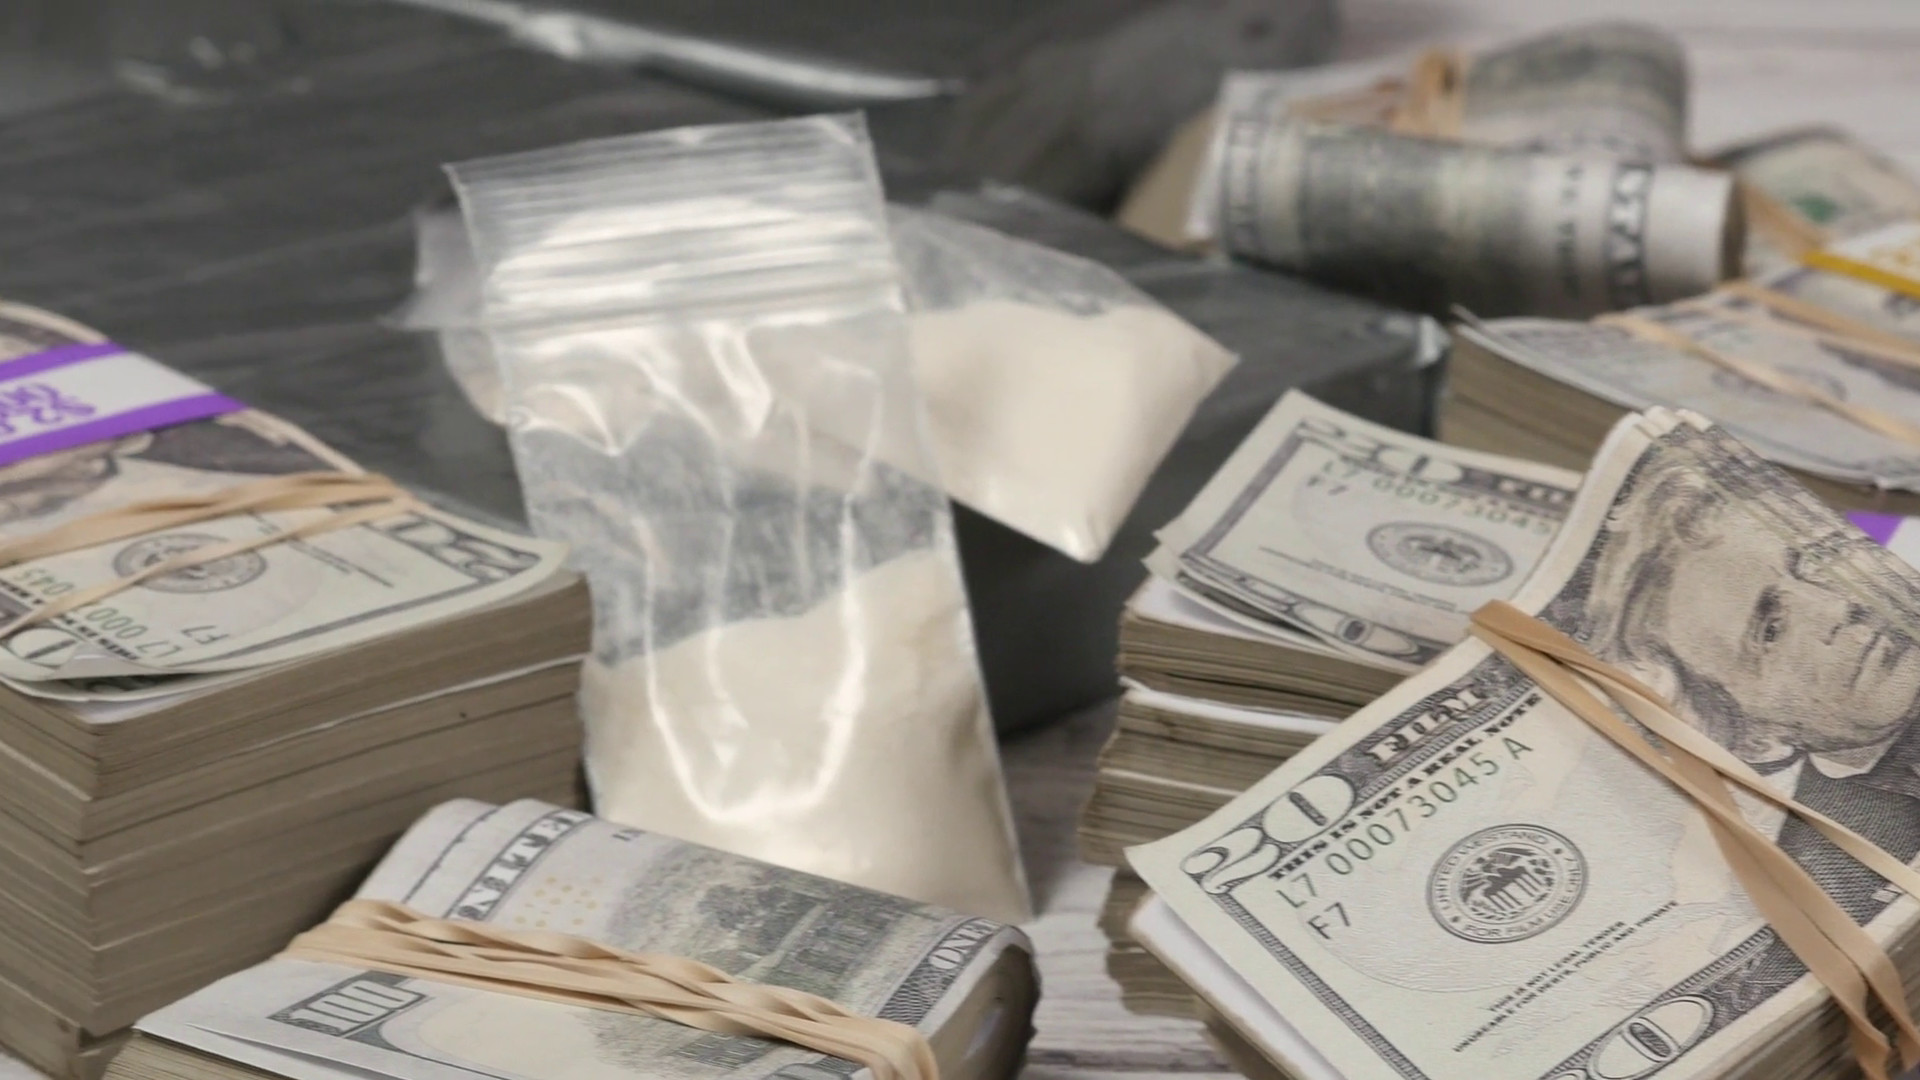 1920x1080 Subscription Library 4K Closeup Cocaine Drugs and Cash Stacks on a Table